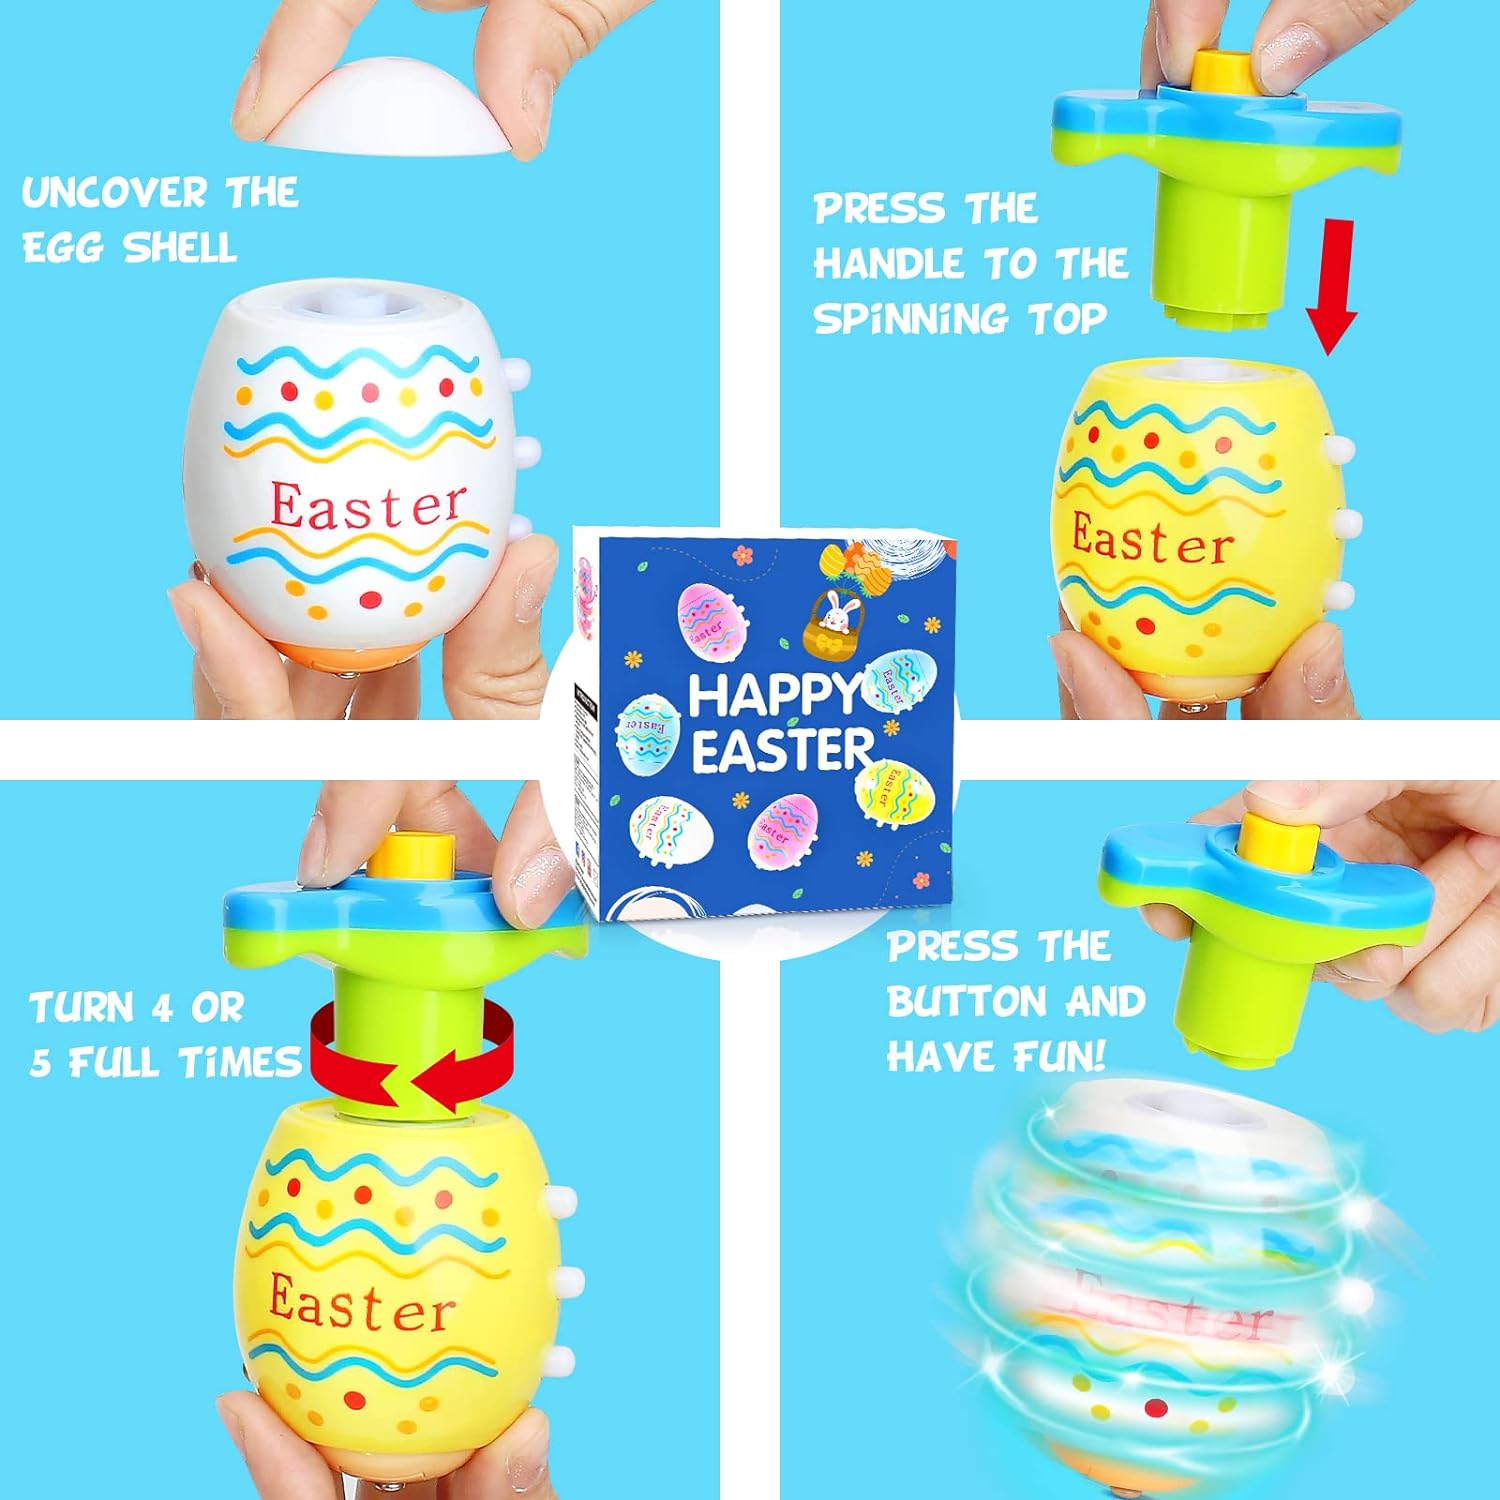 Light Up Easter Eggs Toy Gifts for Kids, 6 Easter Egg Spinning Tops with Flash & Music